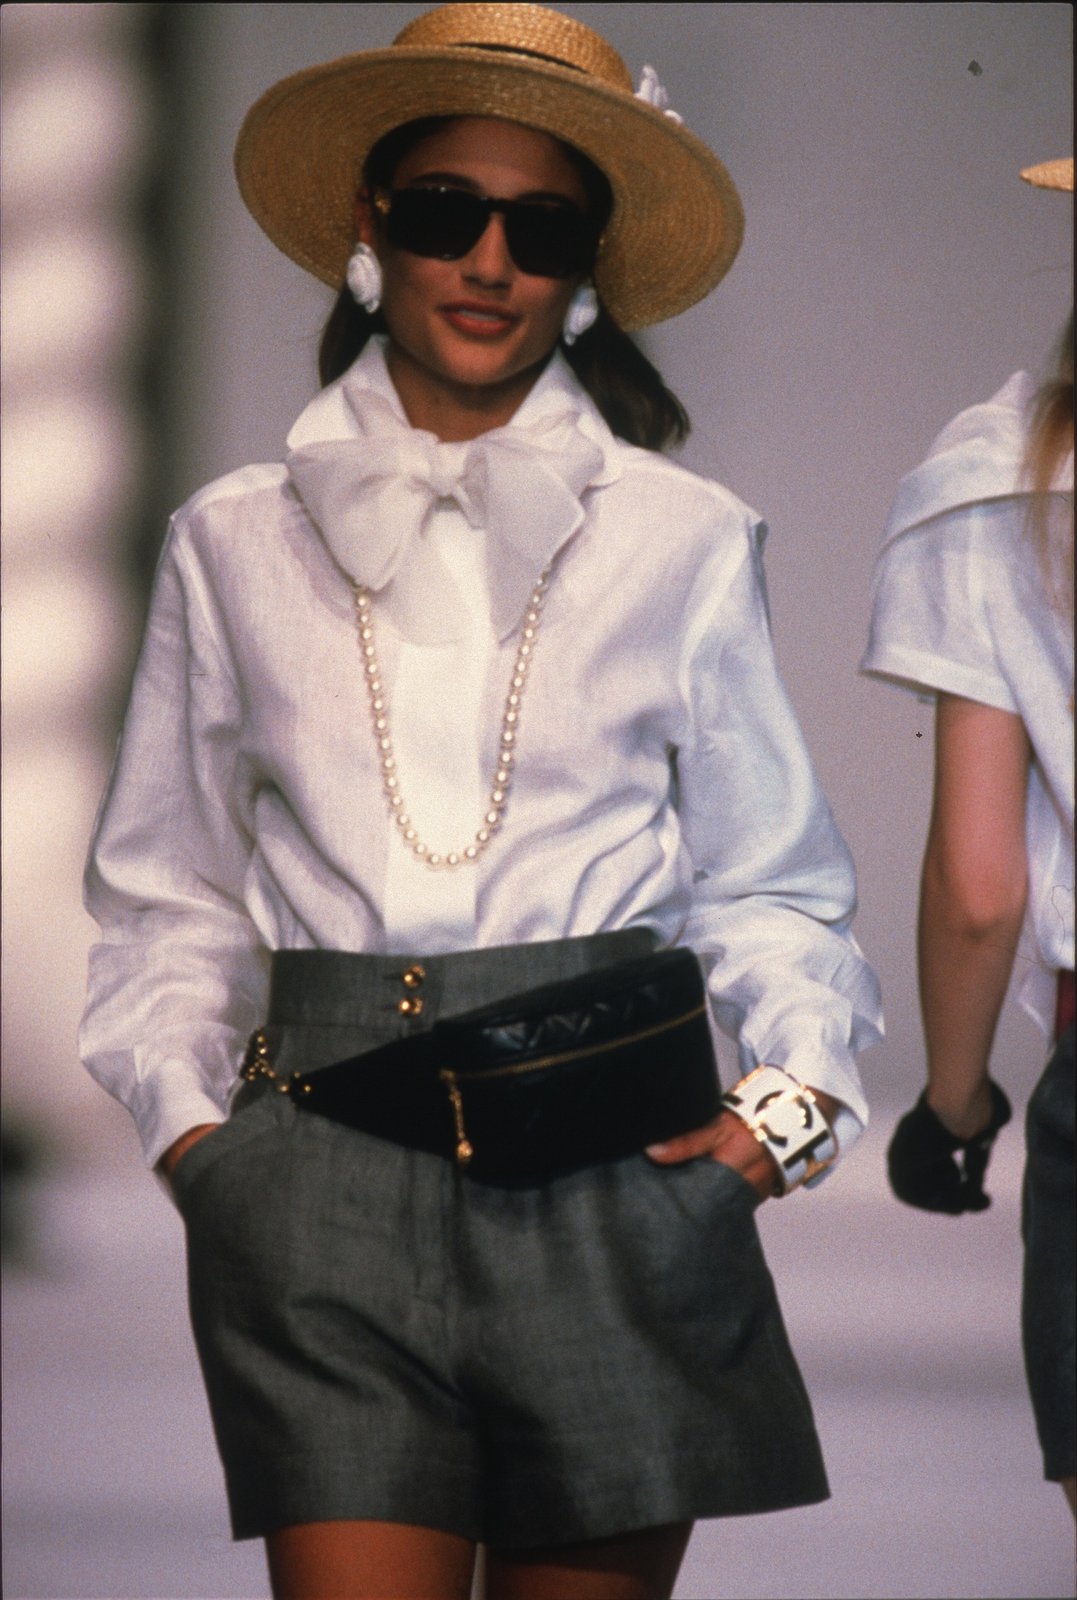 Fashion Classic: CHANEL Spring/Summer 1990 | Page 2 | Lipstick Alley